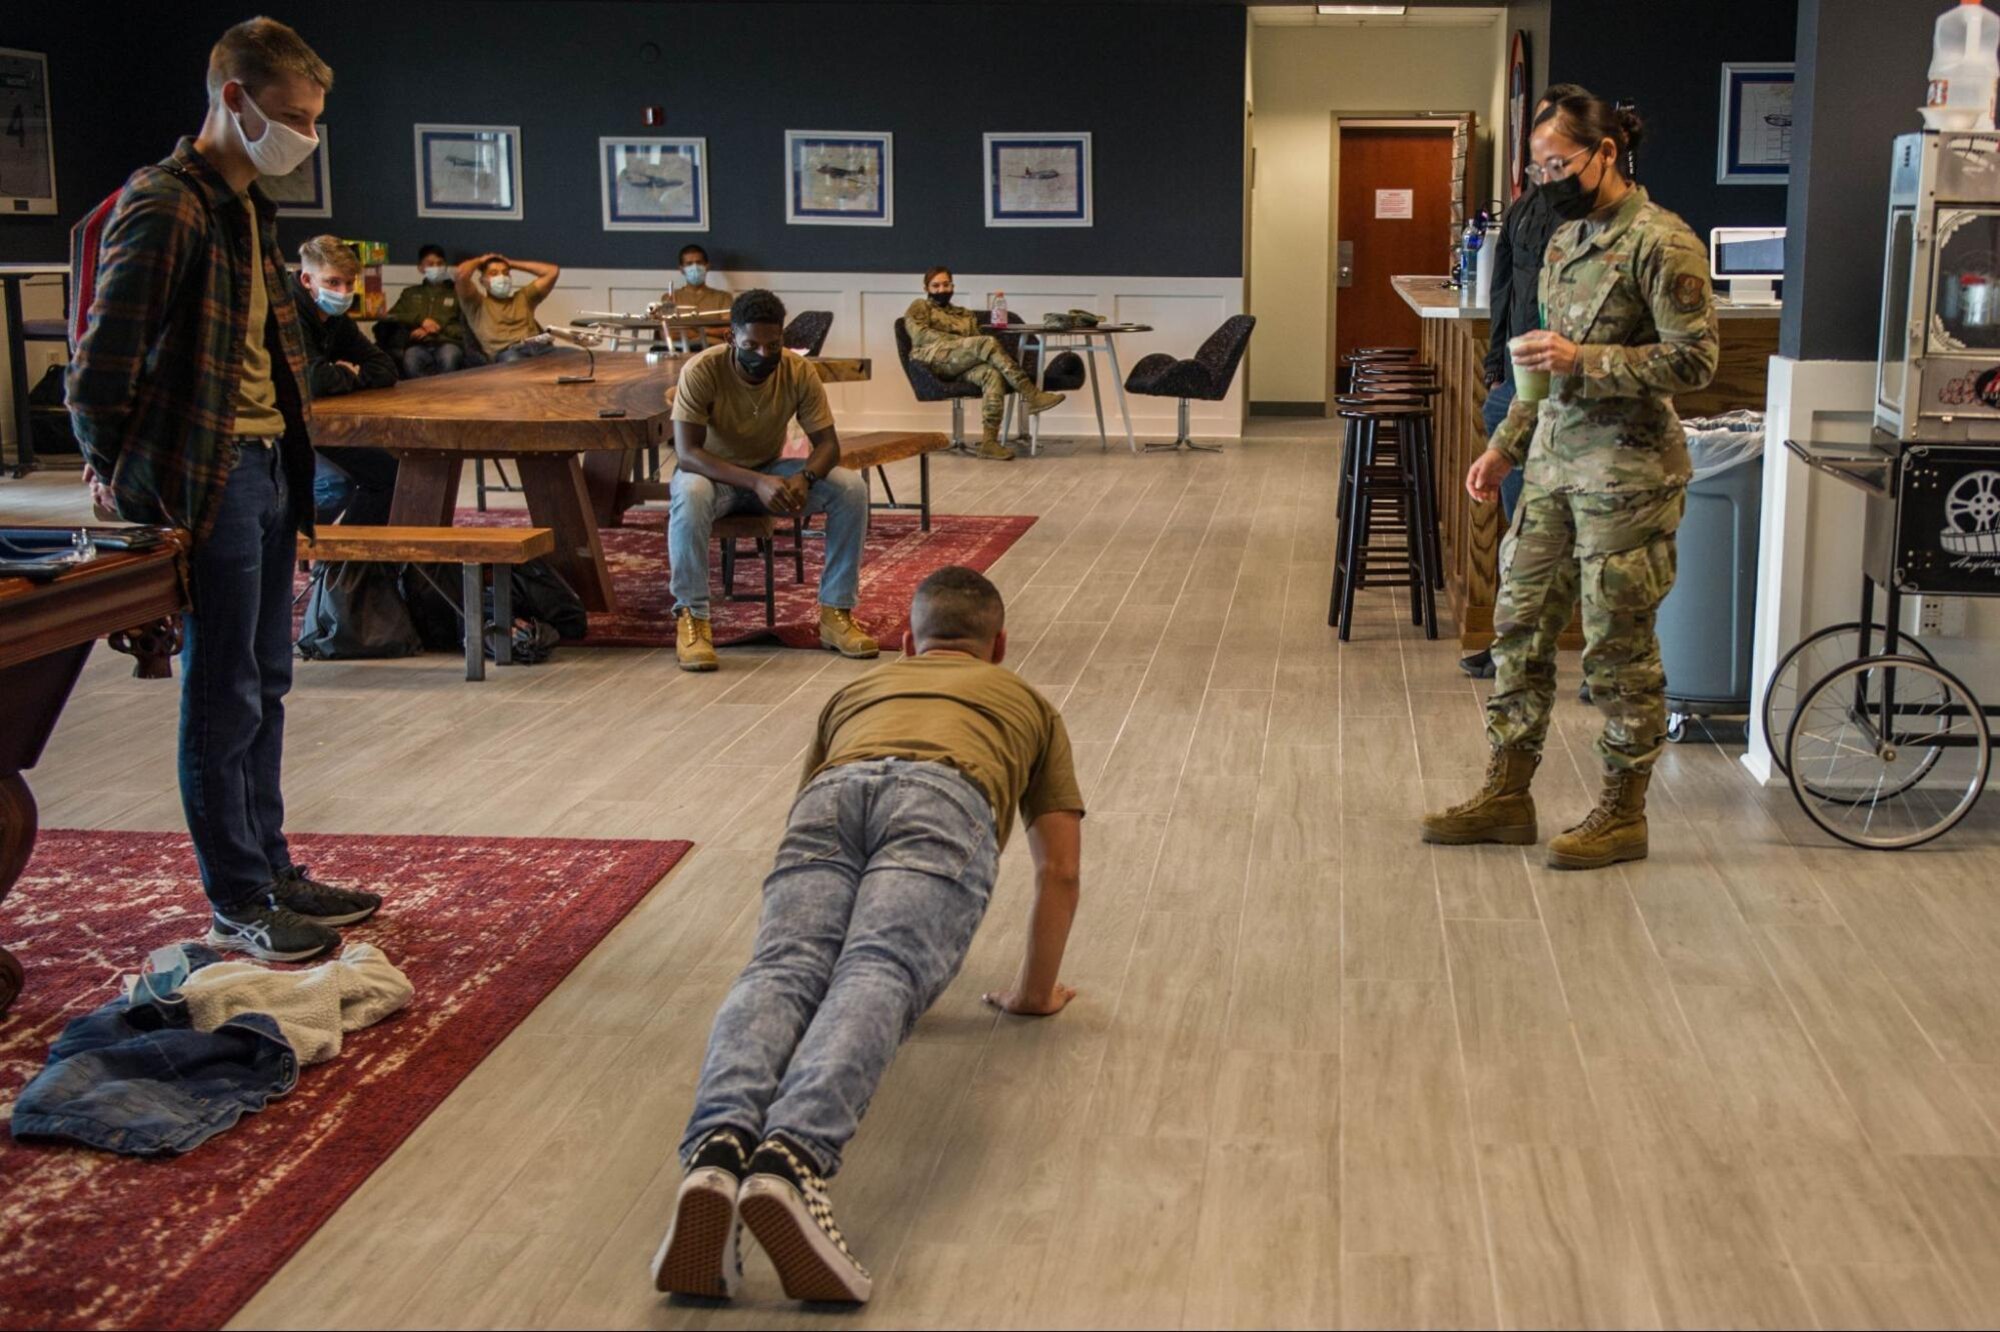 Trainee performs push-ups while others watch.